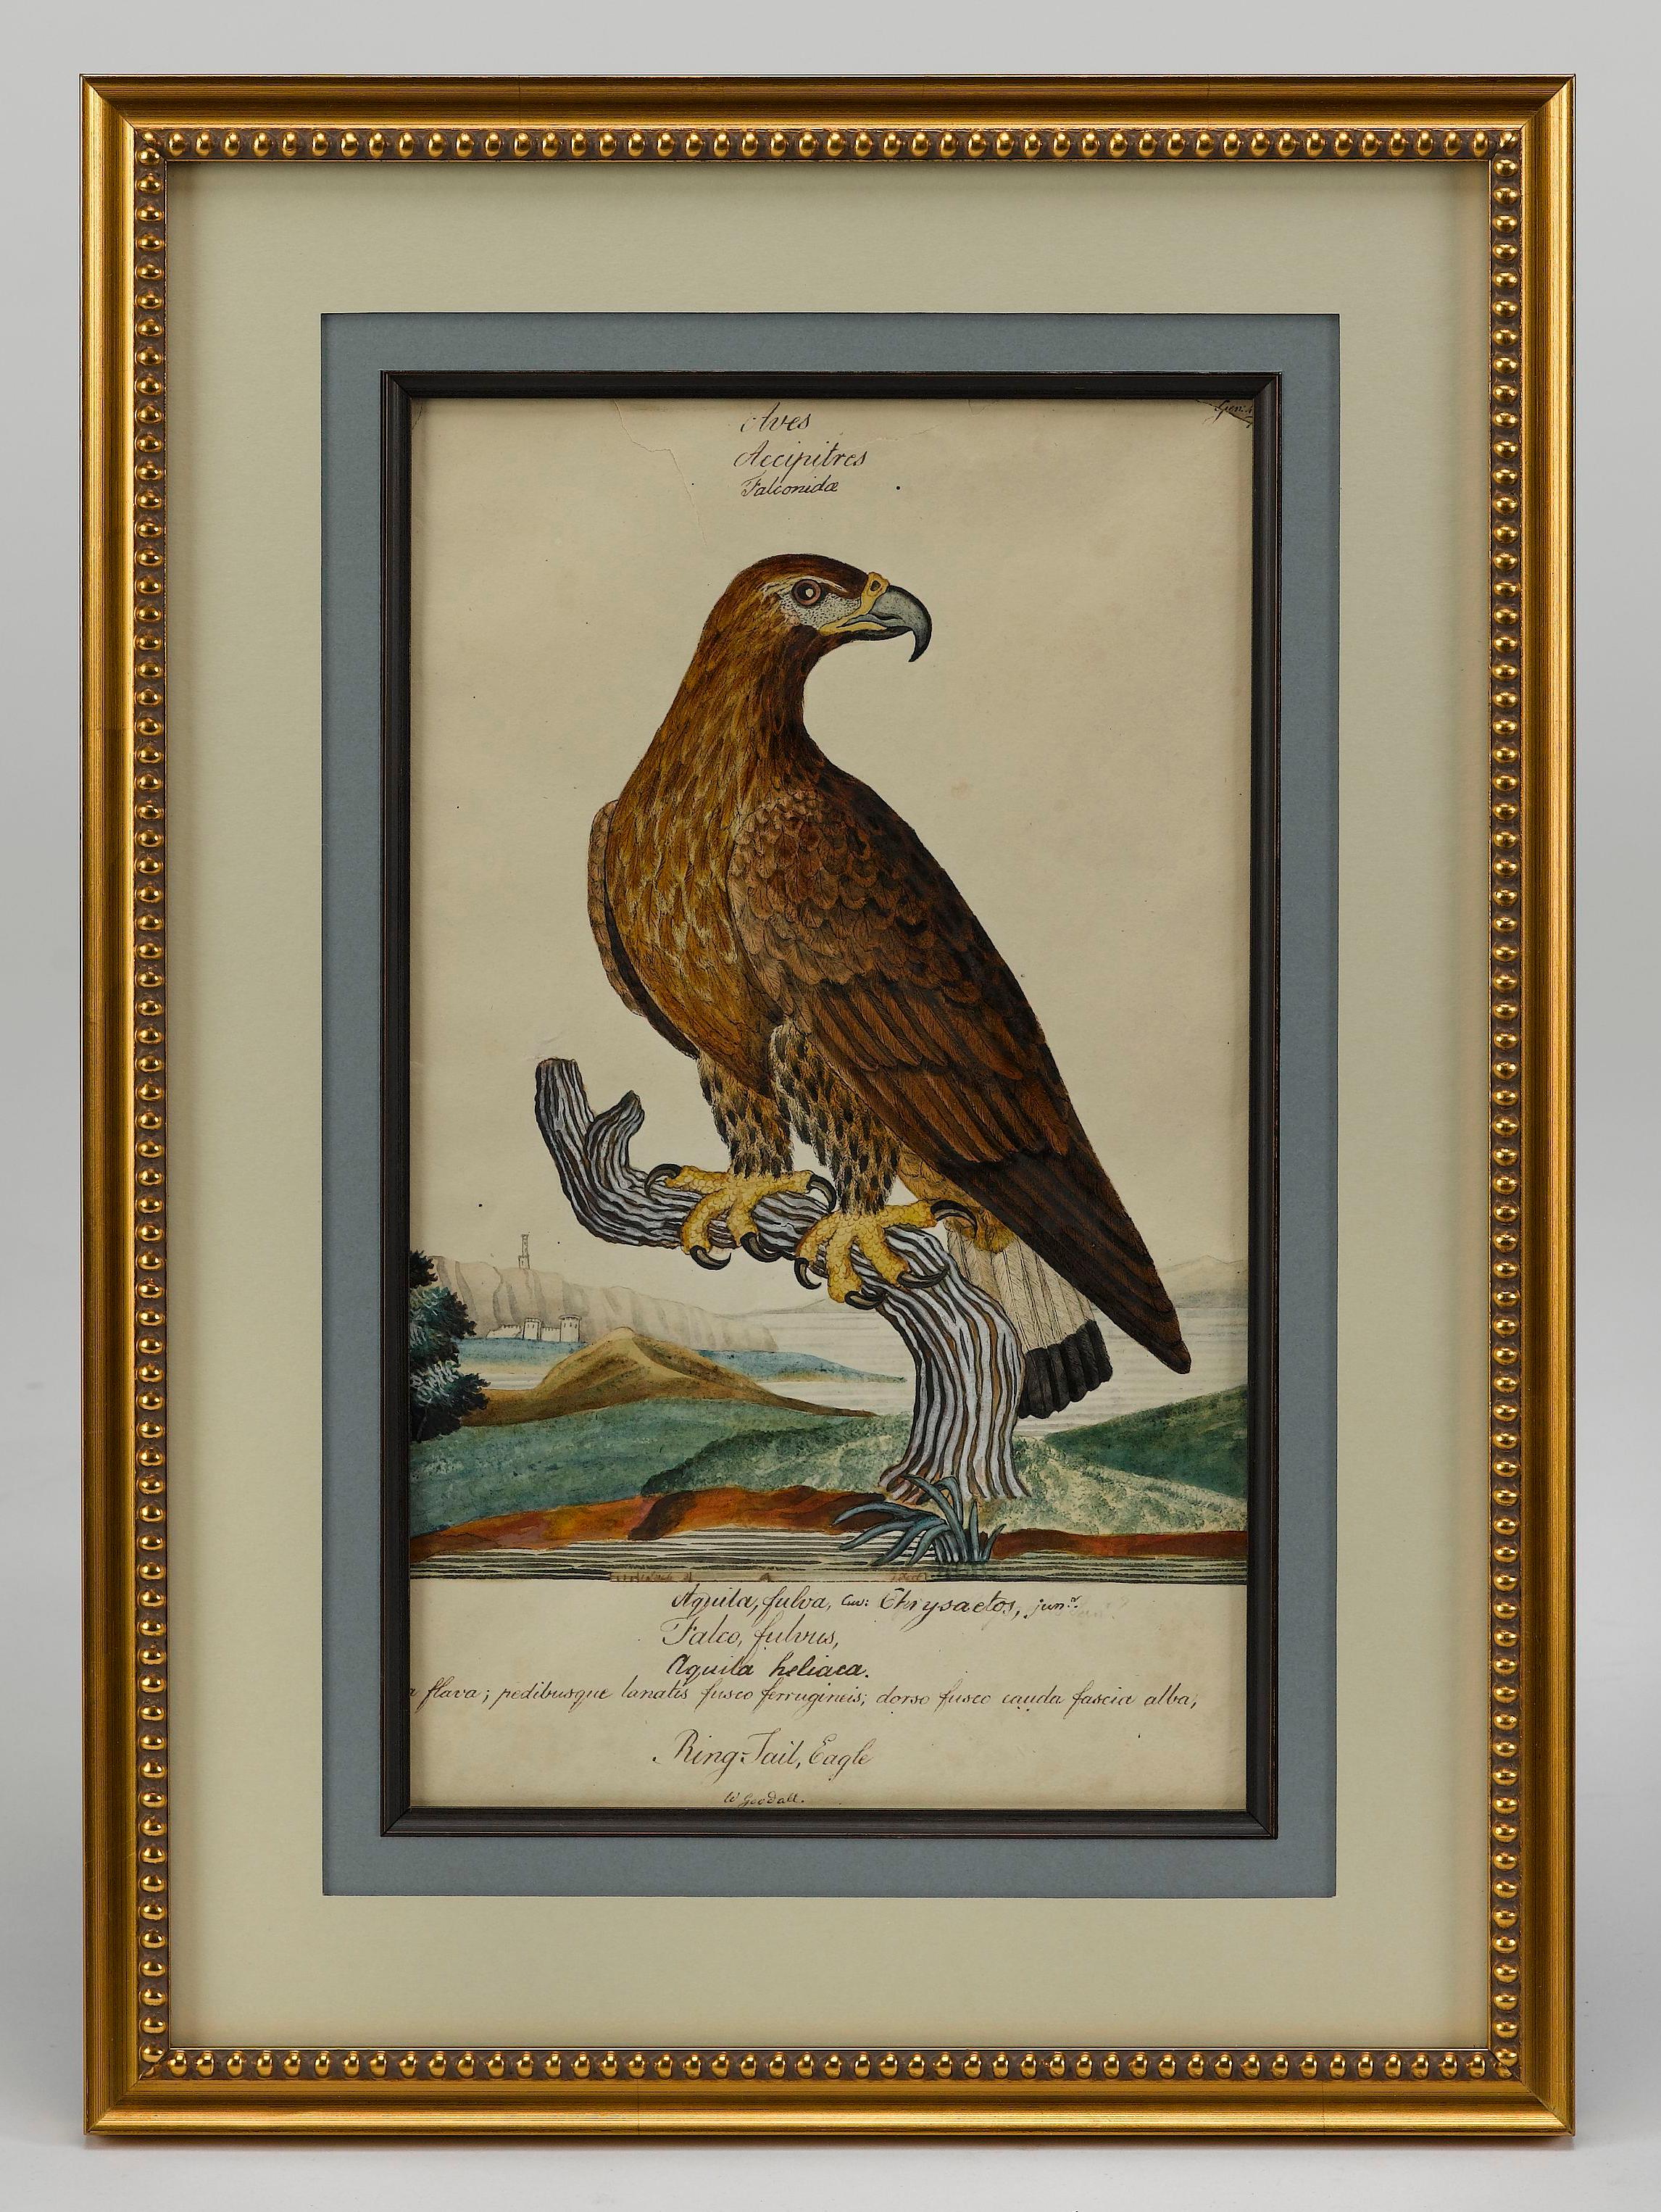 Presented is a stunning original painting of a Ring Tail Eagle by British natural history artist William Goodall. A beautiful and colorful combination of both watercolor and ink, this painting is rendered in a detailed, finished style. The eagle is